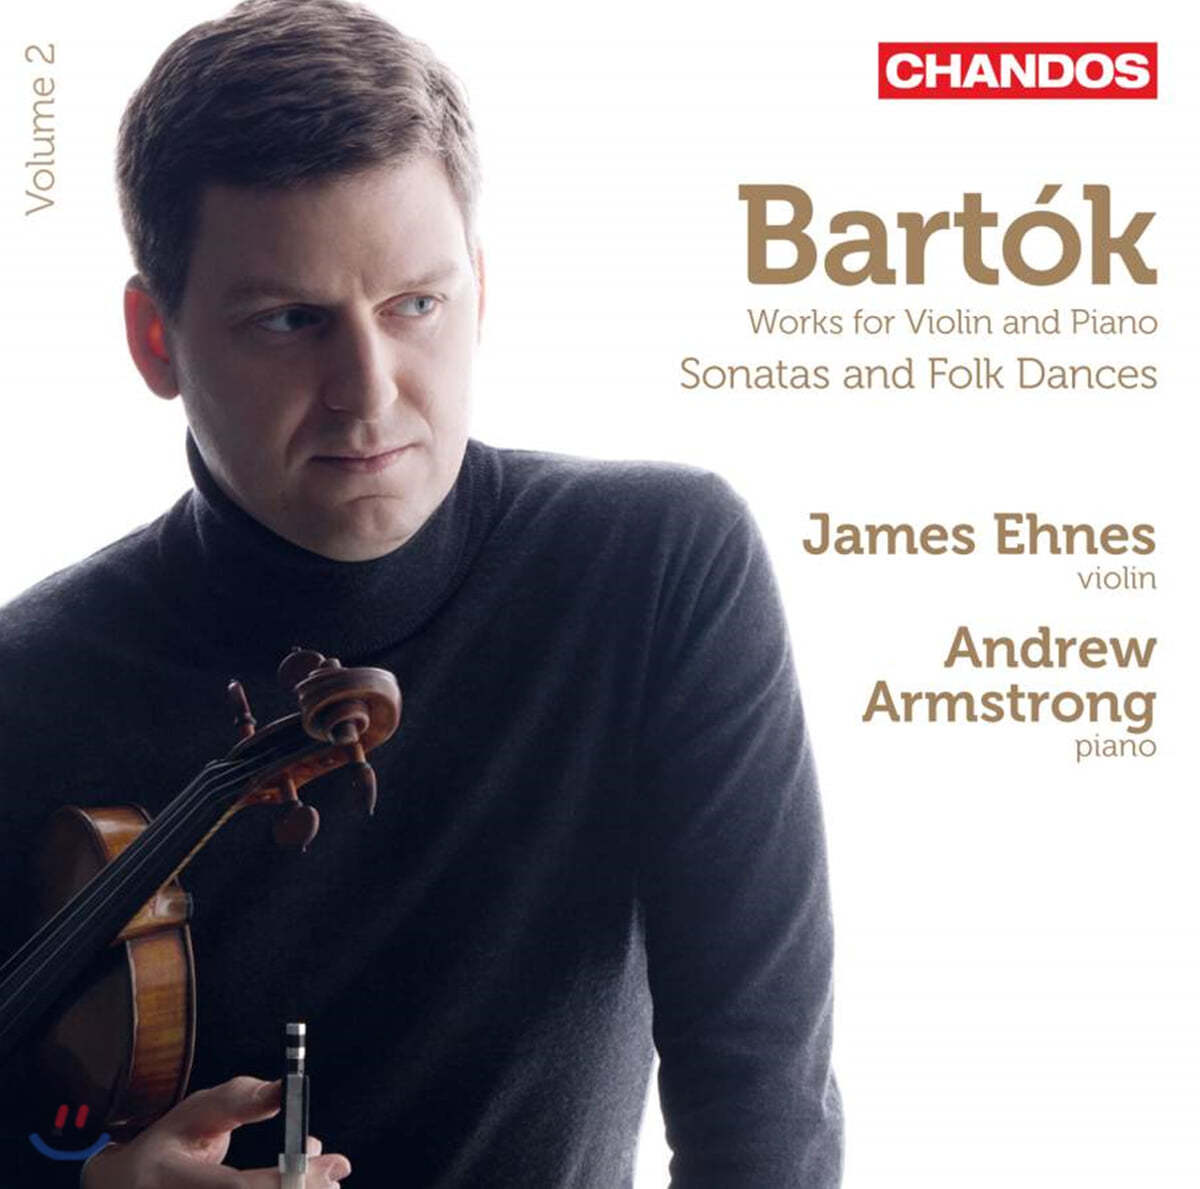 James Ehnes / Andrew Armstrong 바르톡: 바이올린과 피아노를 위한 작품집 (Bartok: Works for Violin and Piano)